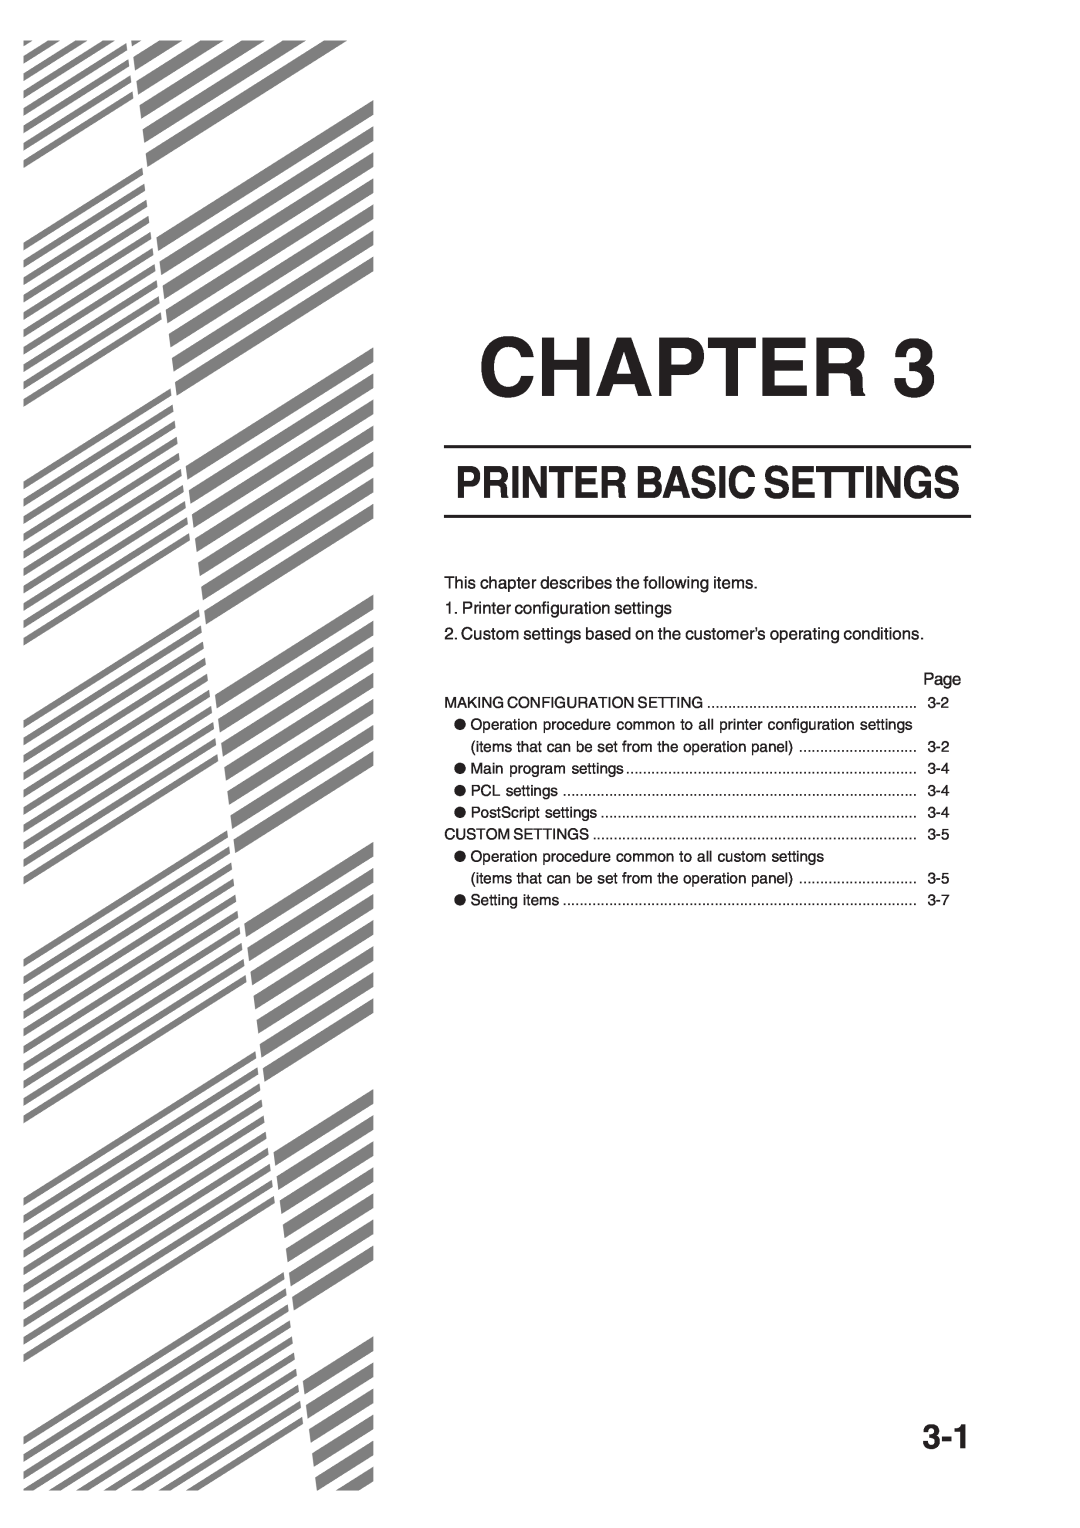 Sharp AR-350 Printer Basic Settings, Chapter, This chapter describes the following items, Printer configuration settings 